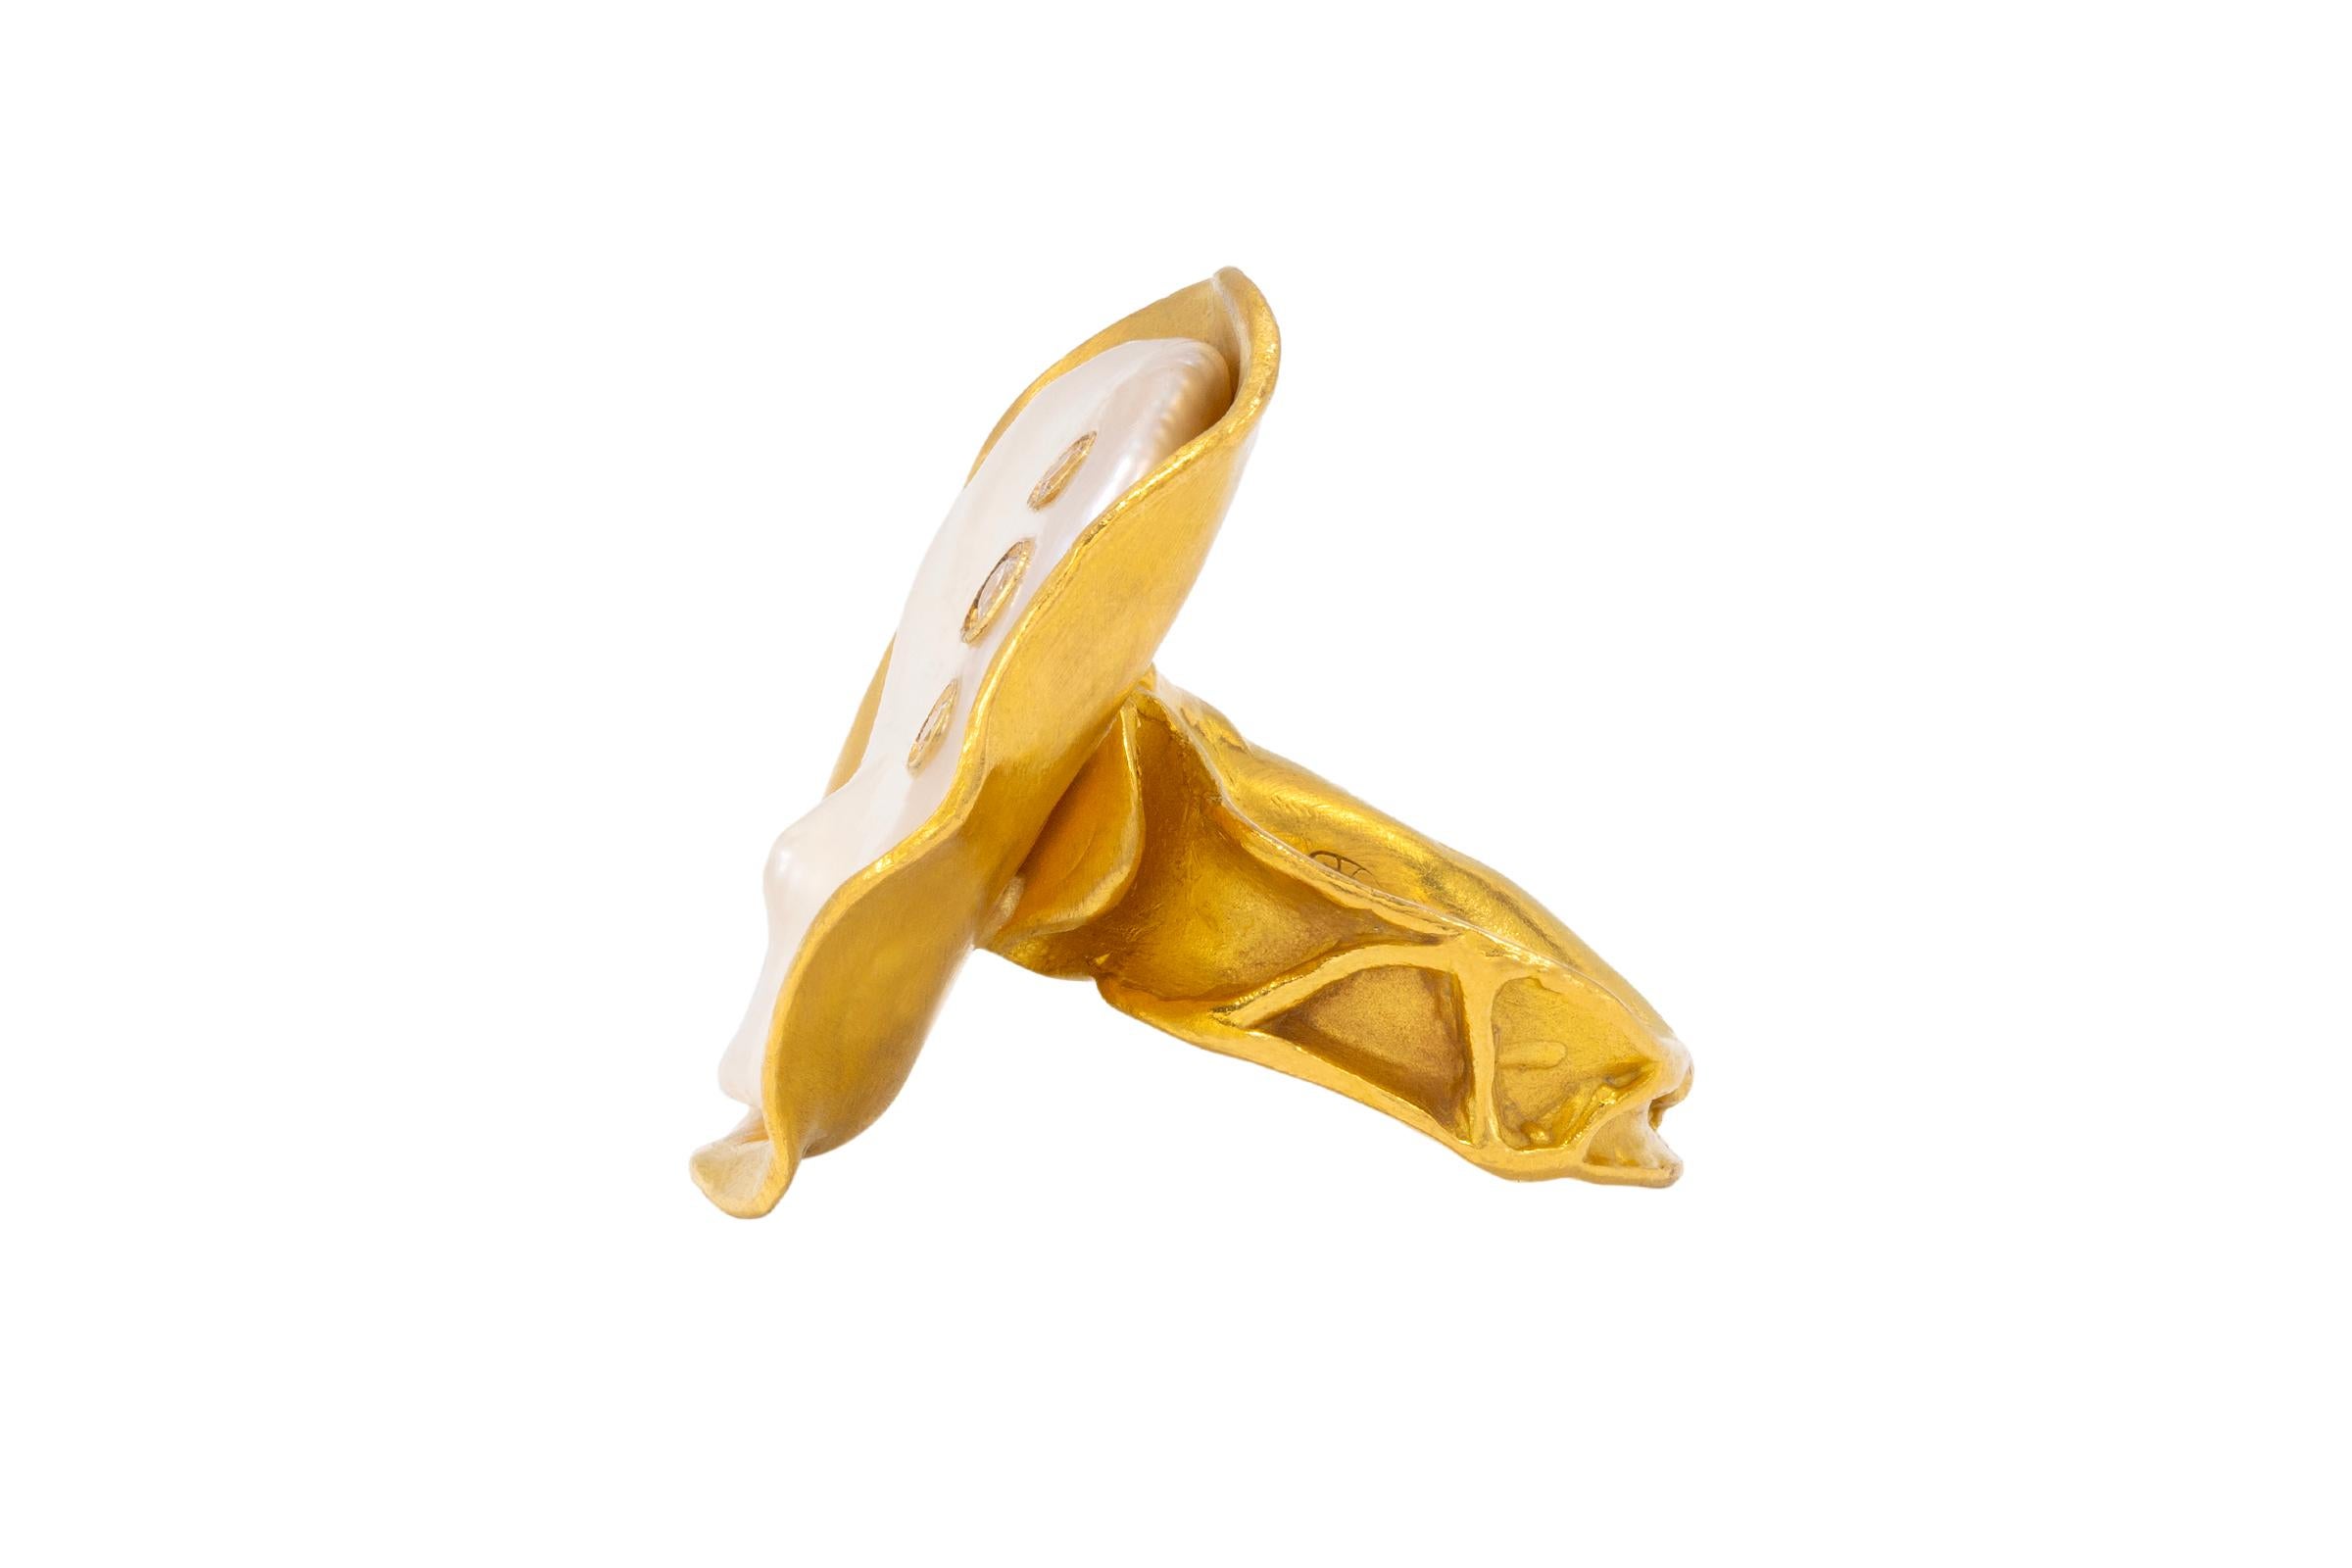 Artisan Diamond and Pearl Cocktail Ring in 22k Gold, by Tagili For Sale